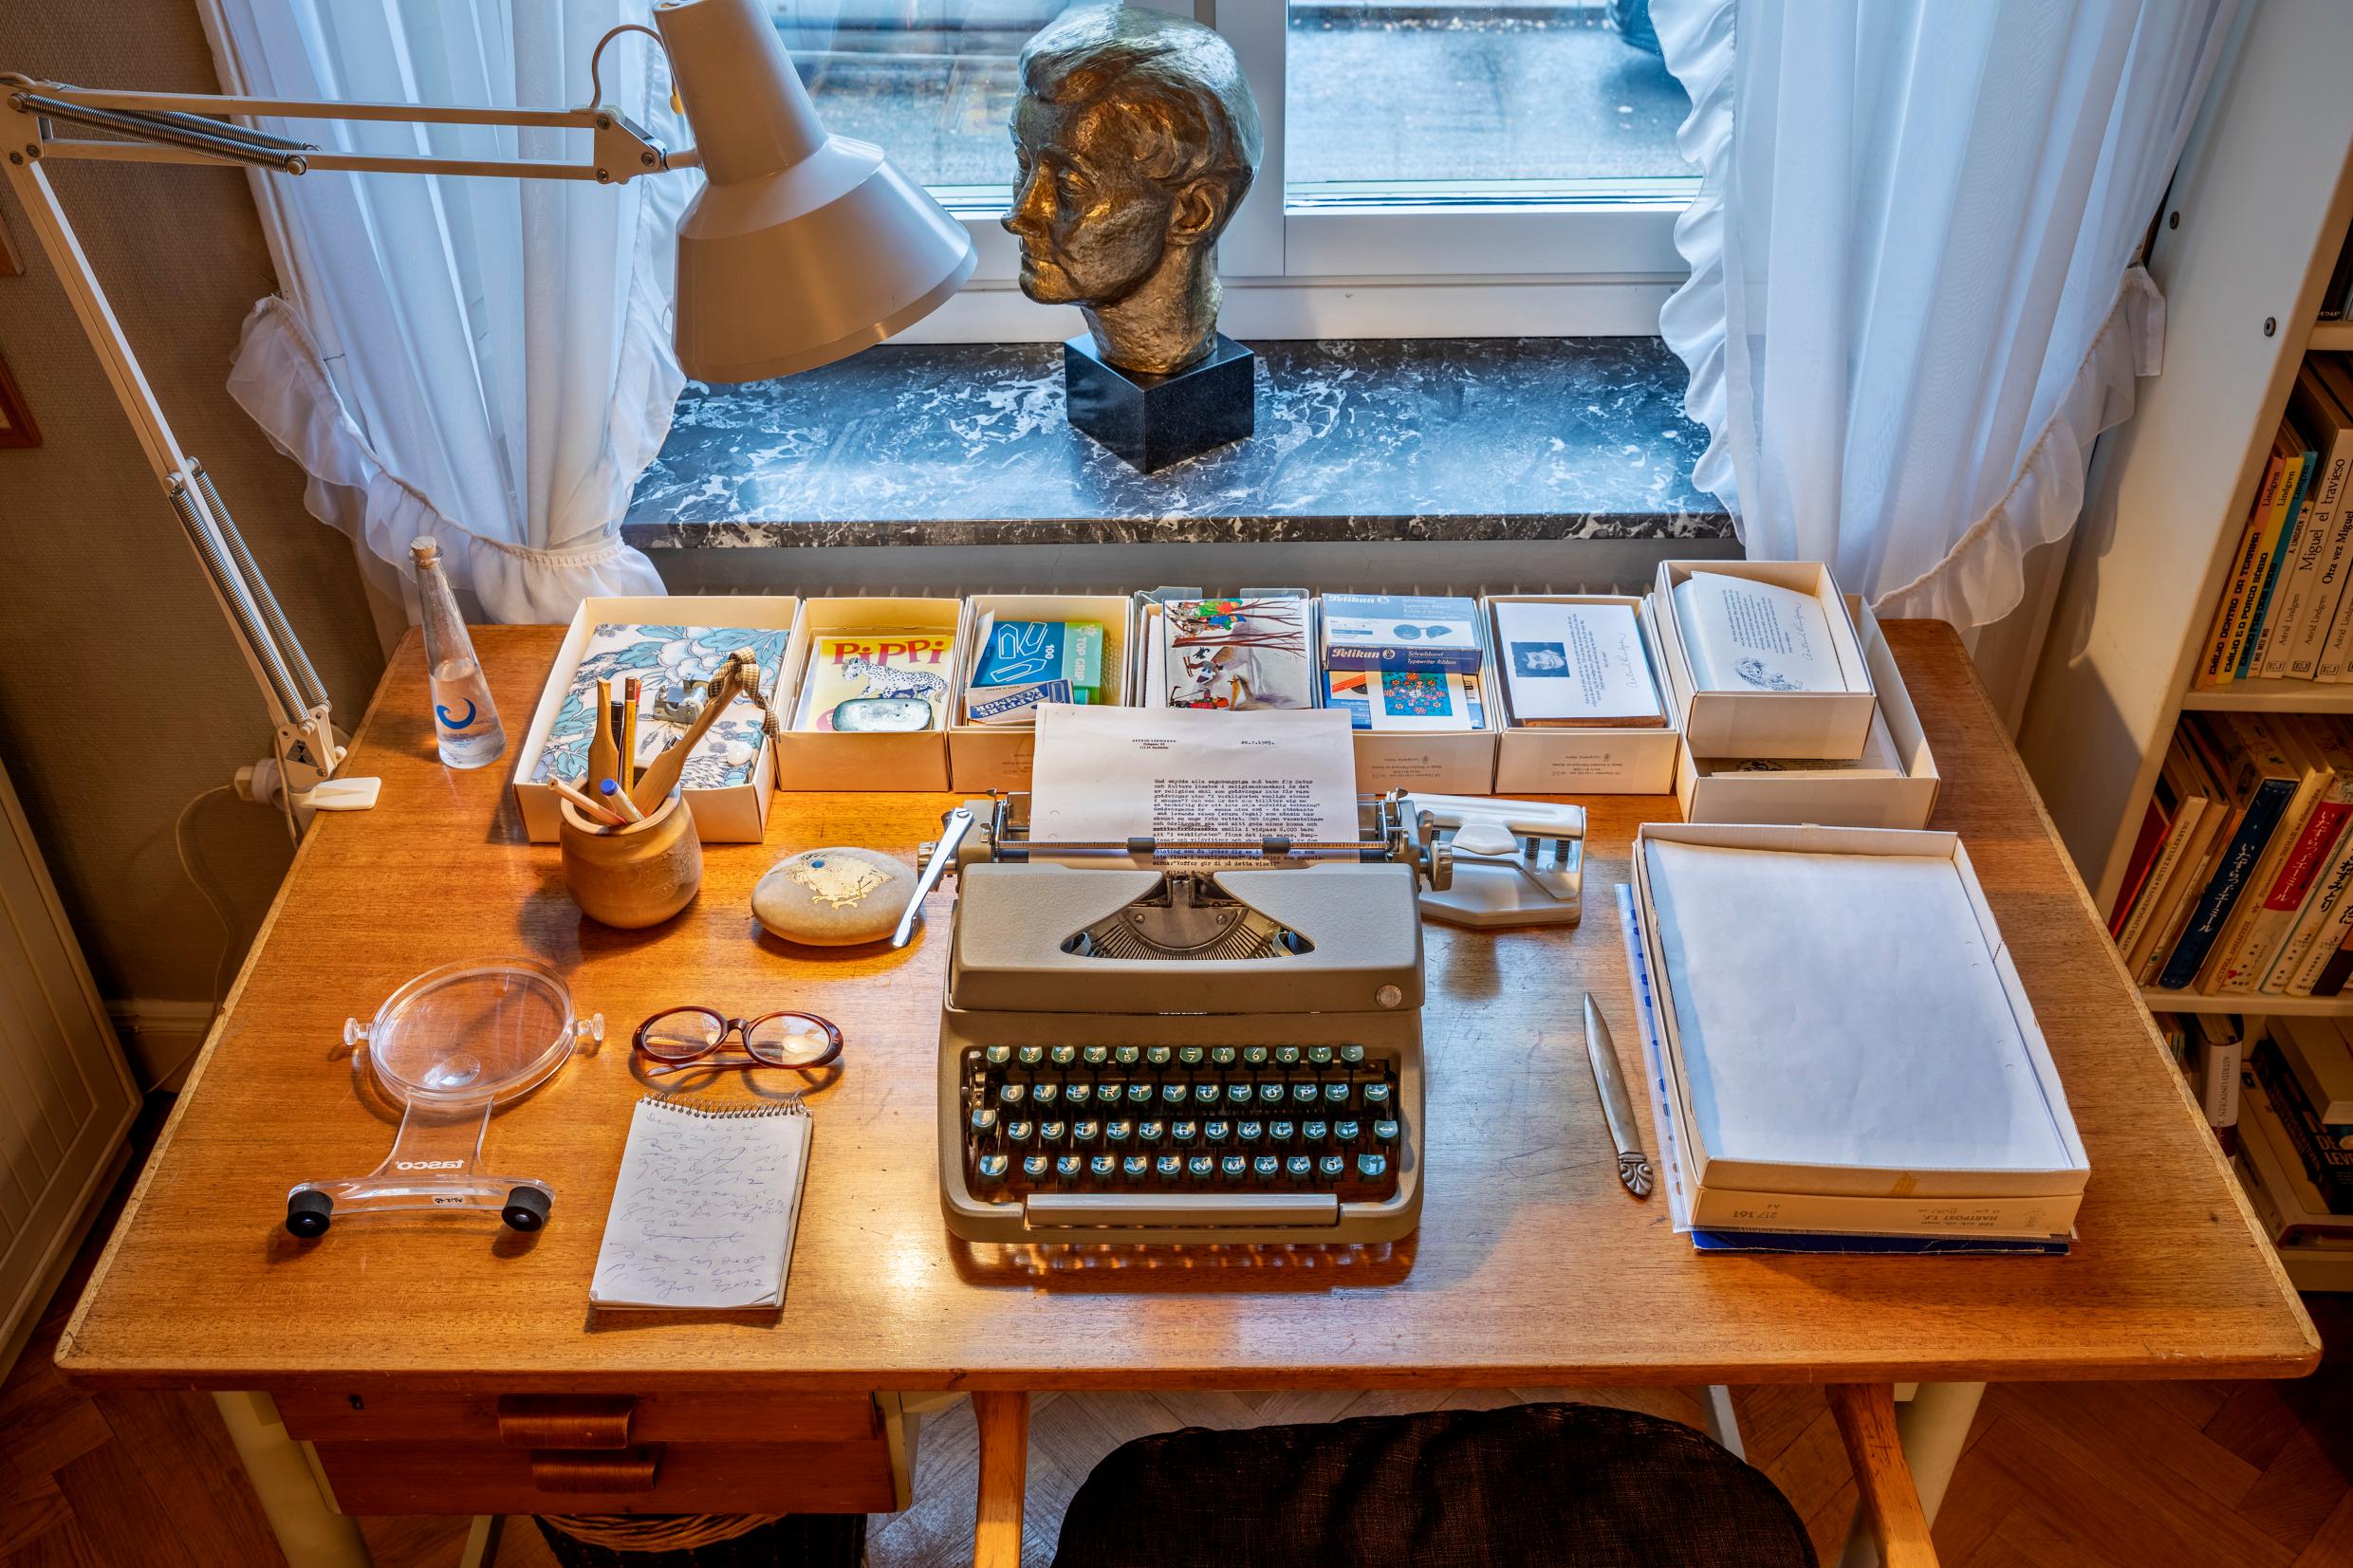 A desk with a reading lamp, a typewriter, books and other artifacts.